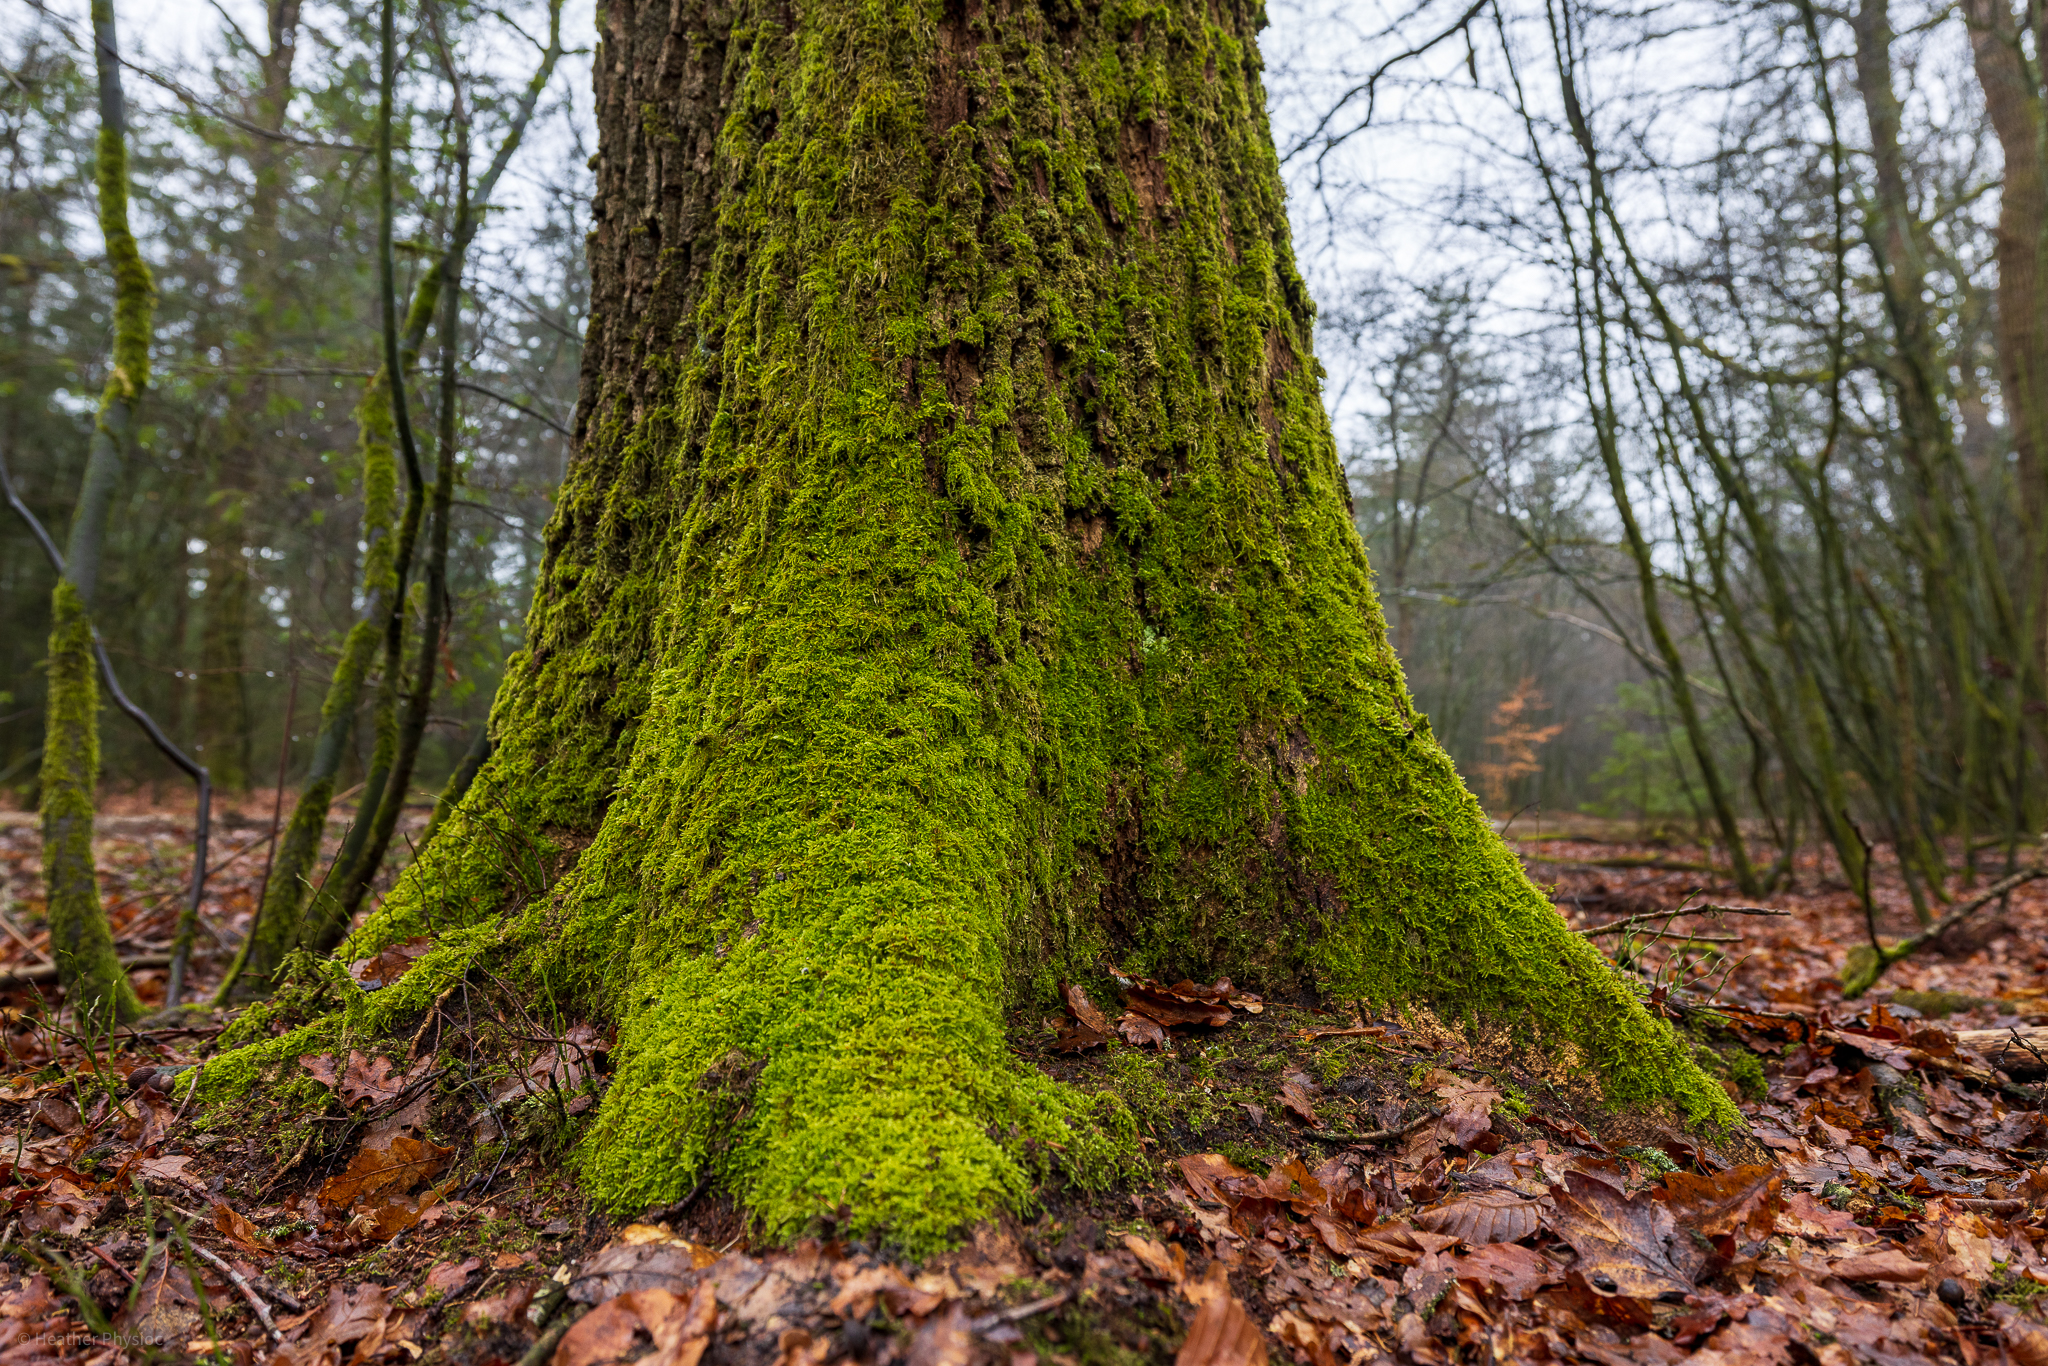 Plait moss wraps a trunk at Veluwezoom National Park in Netherlands